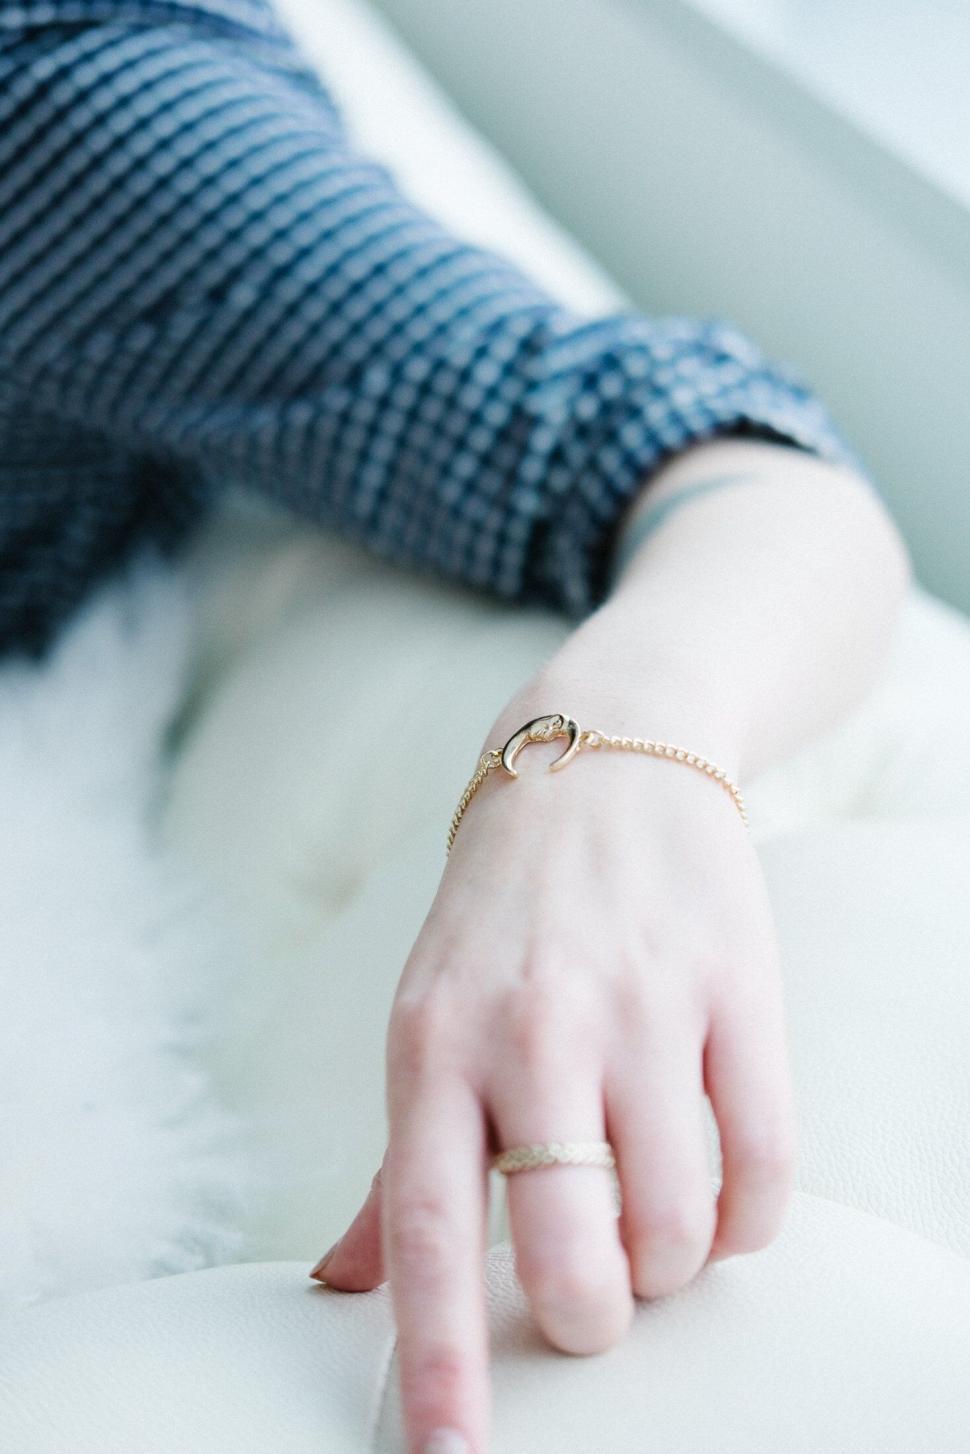 Free Image of Delicate gold bracelet on woman s wrist 